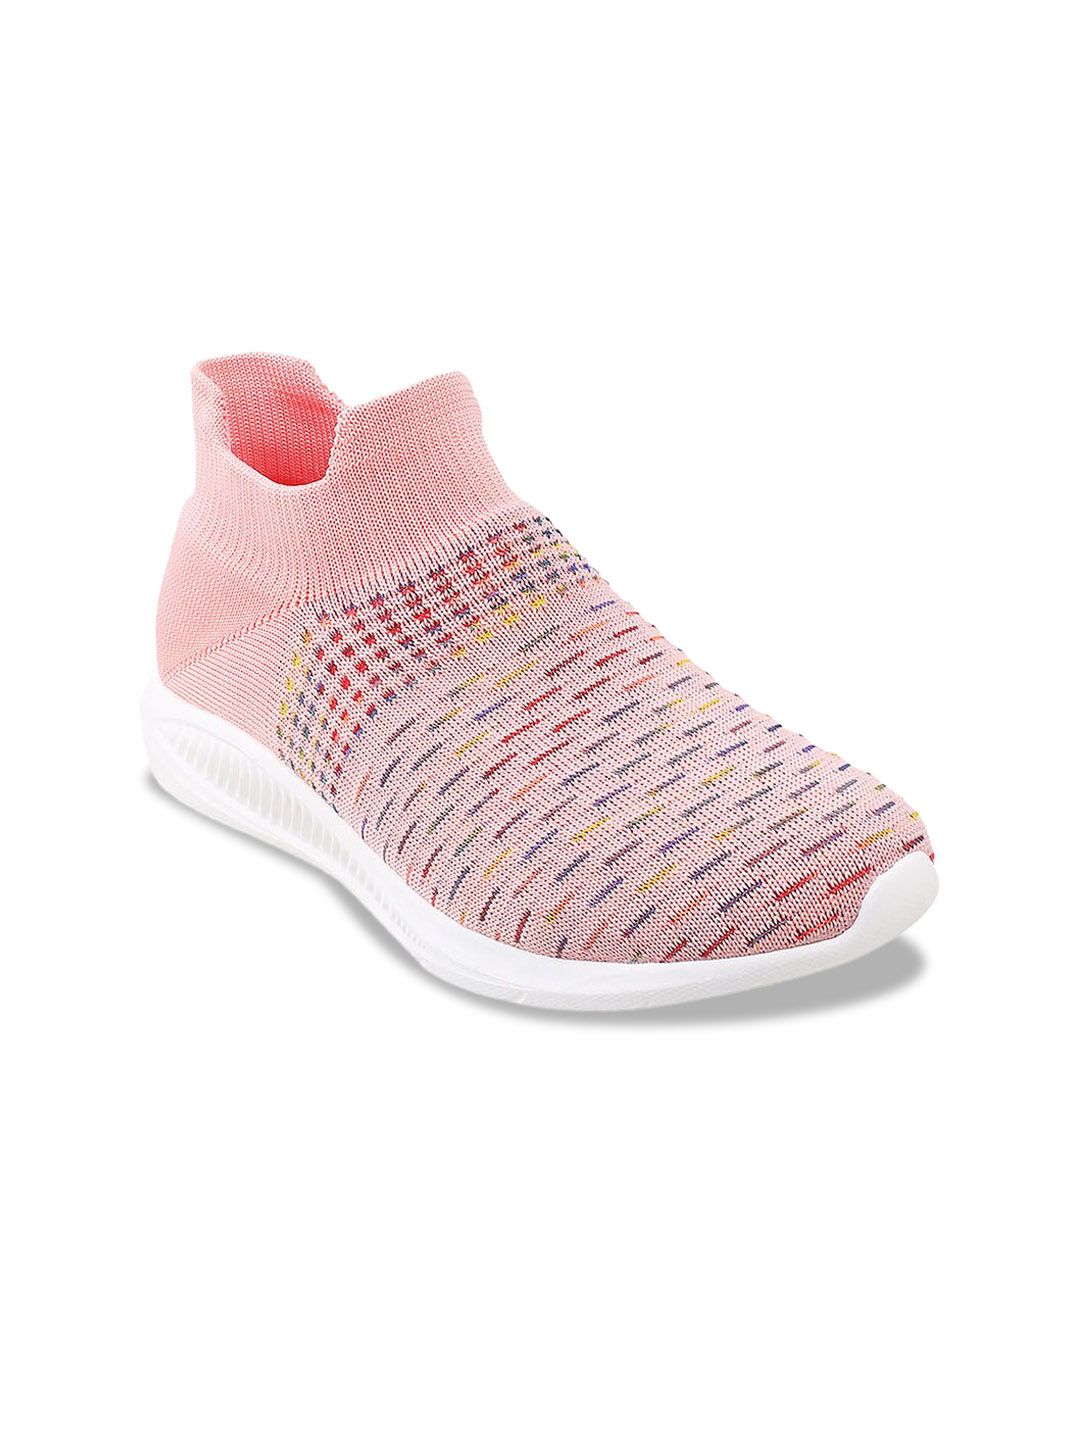 WALKWAY by Metro Women Peach-Coloured Woven Design Slip-On Sneakers Price in India